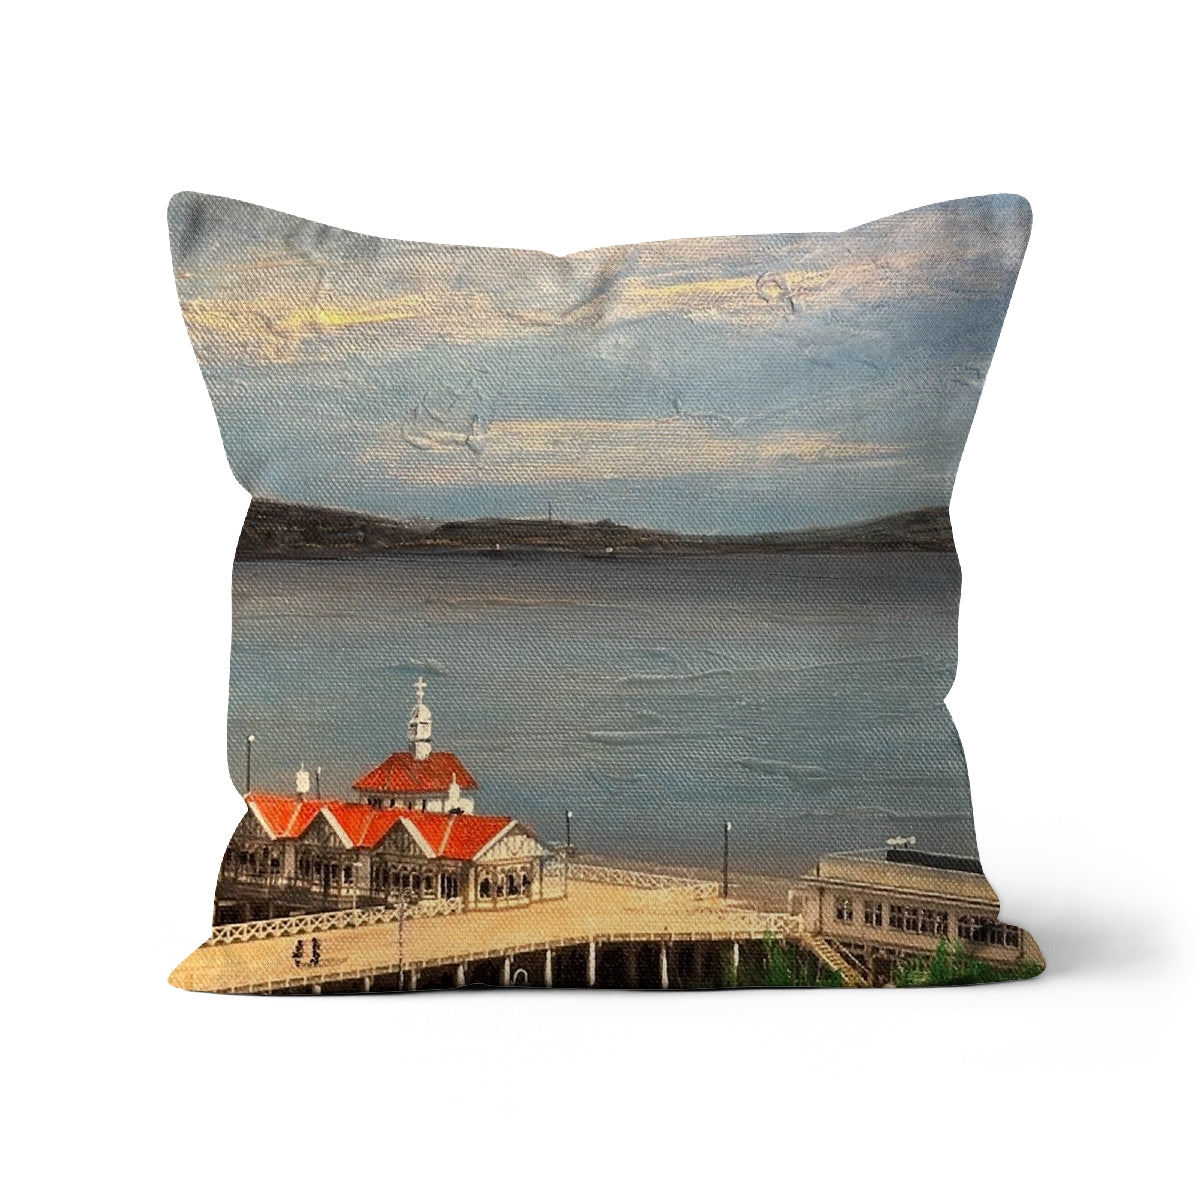 Looking From Dunoon Art Gifts Cushion-Cushions-River Clyde Art Gallery-Faux Suede-22"x22"-Paintings, Prints, Homeware, Art Gifts From Scotland By Scottish Artist Kevin Hunter